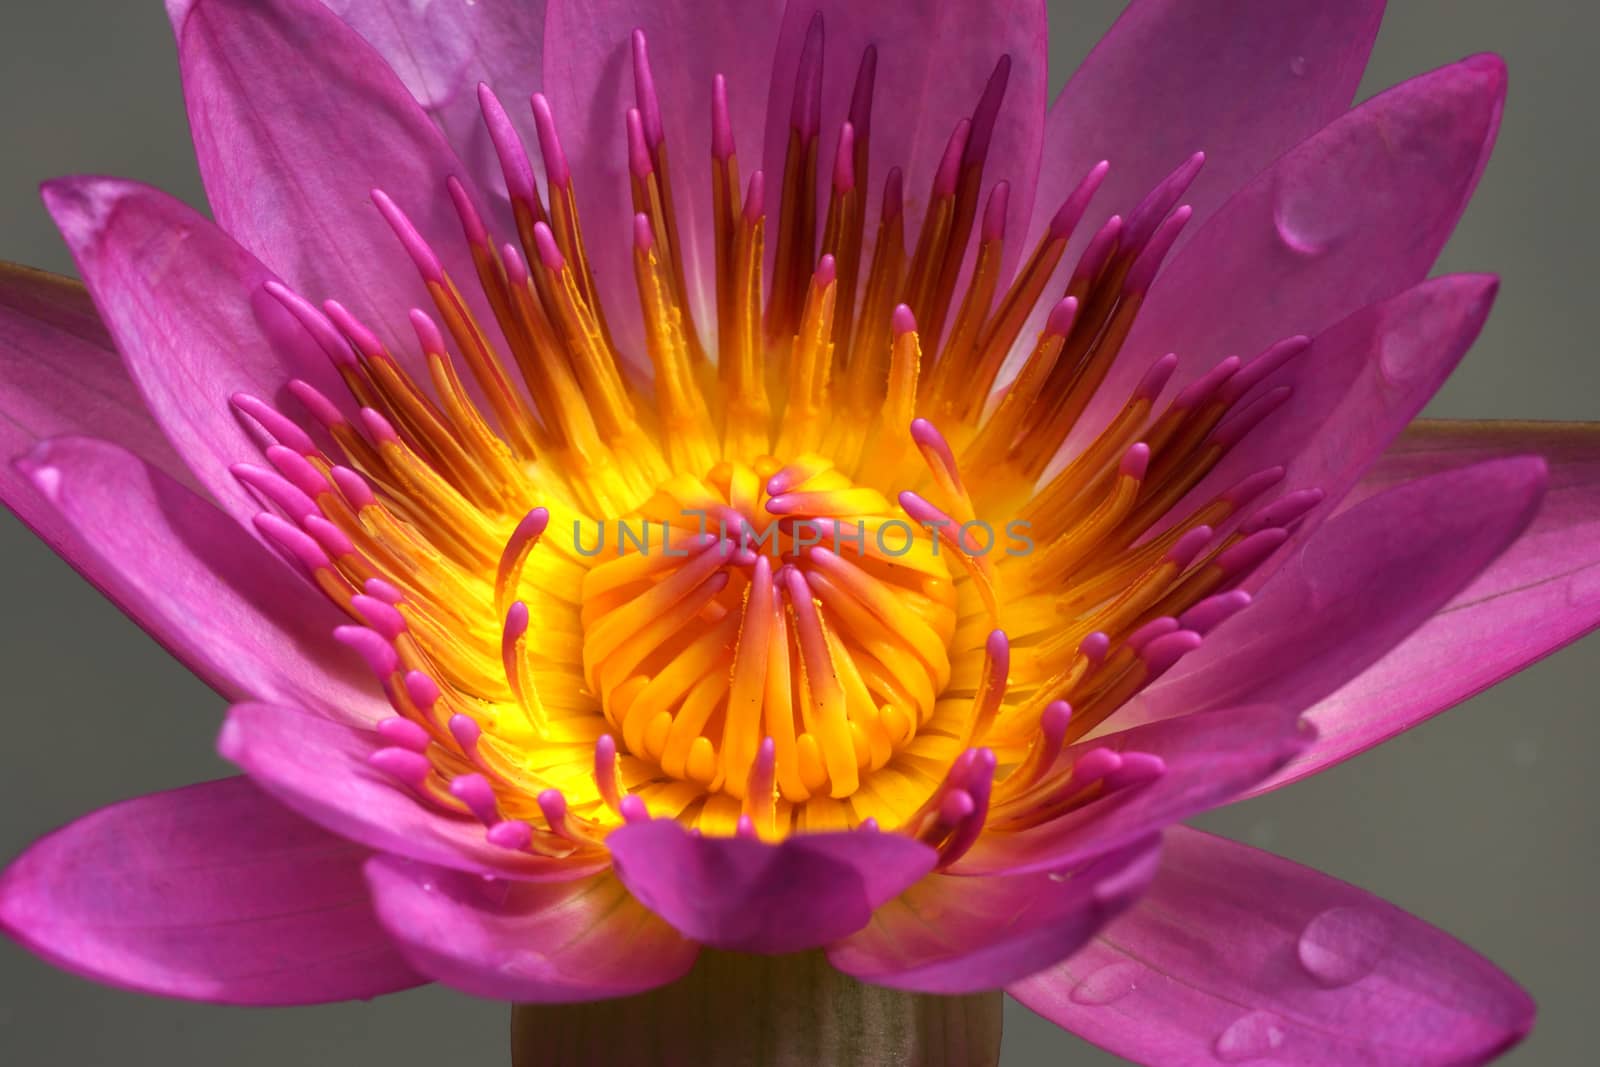 Pink lotus blossoms or water lily flowers blooming